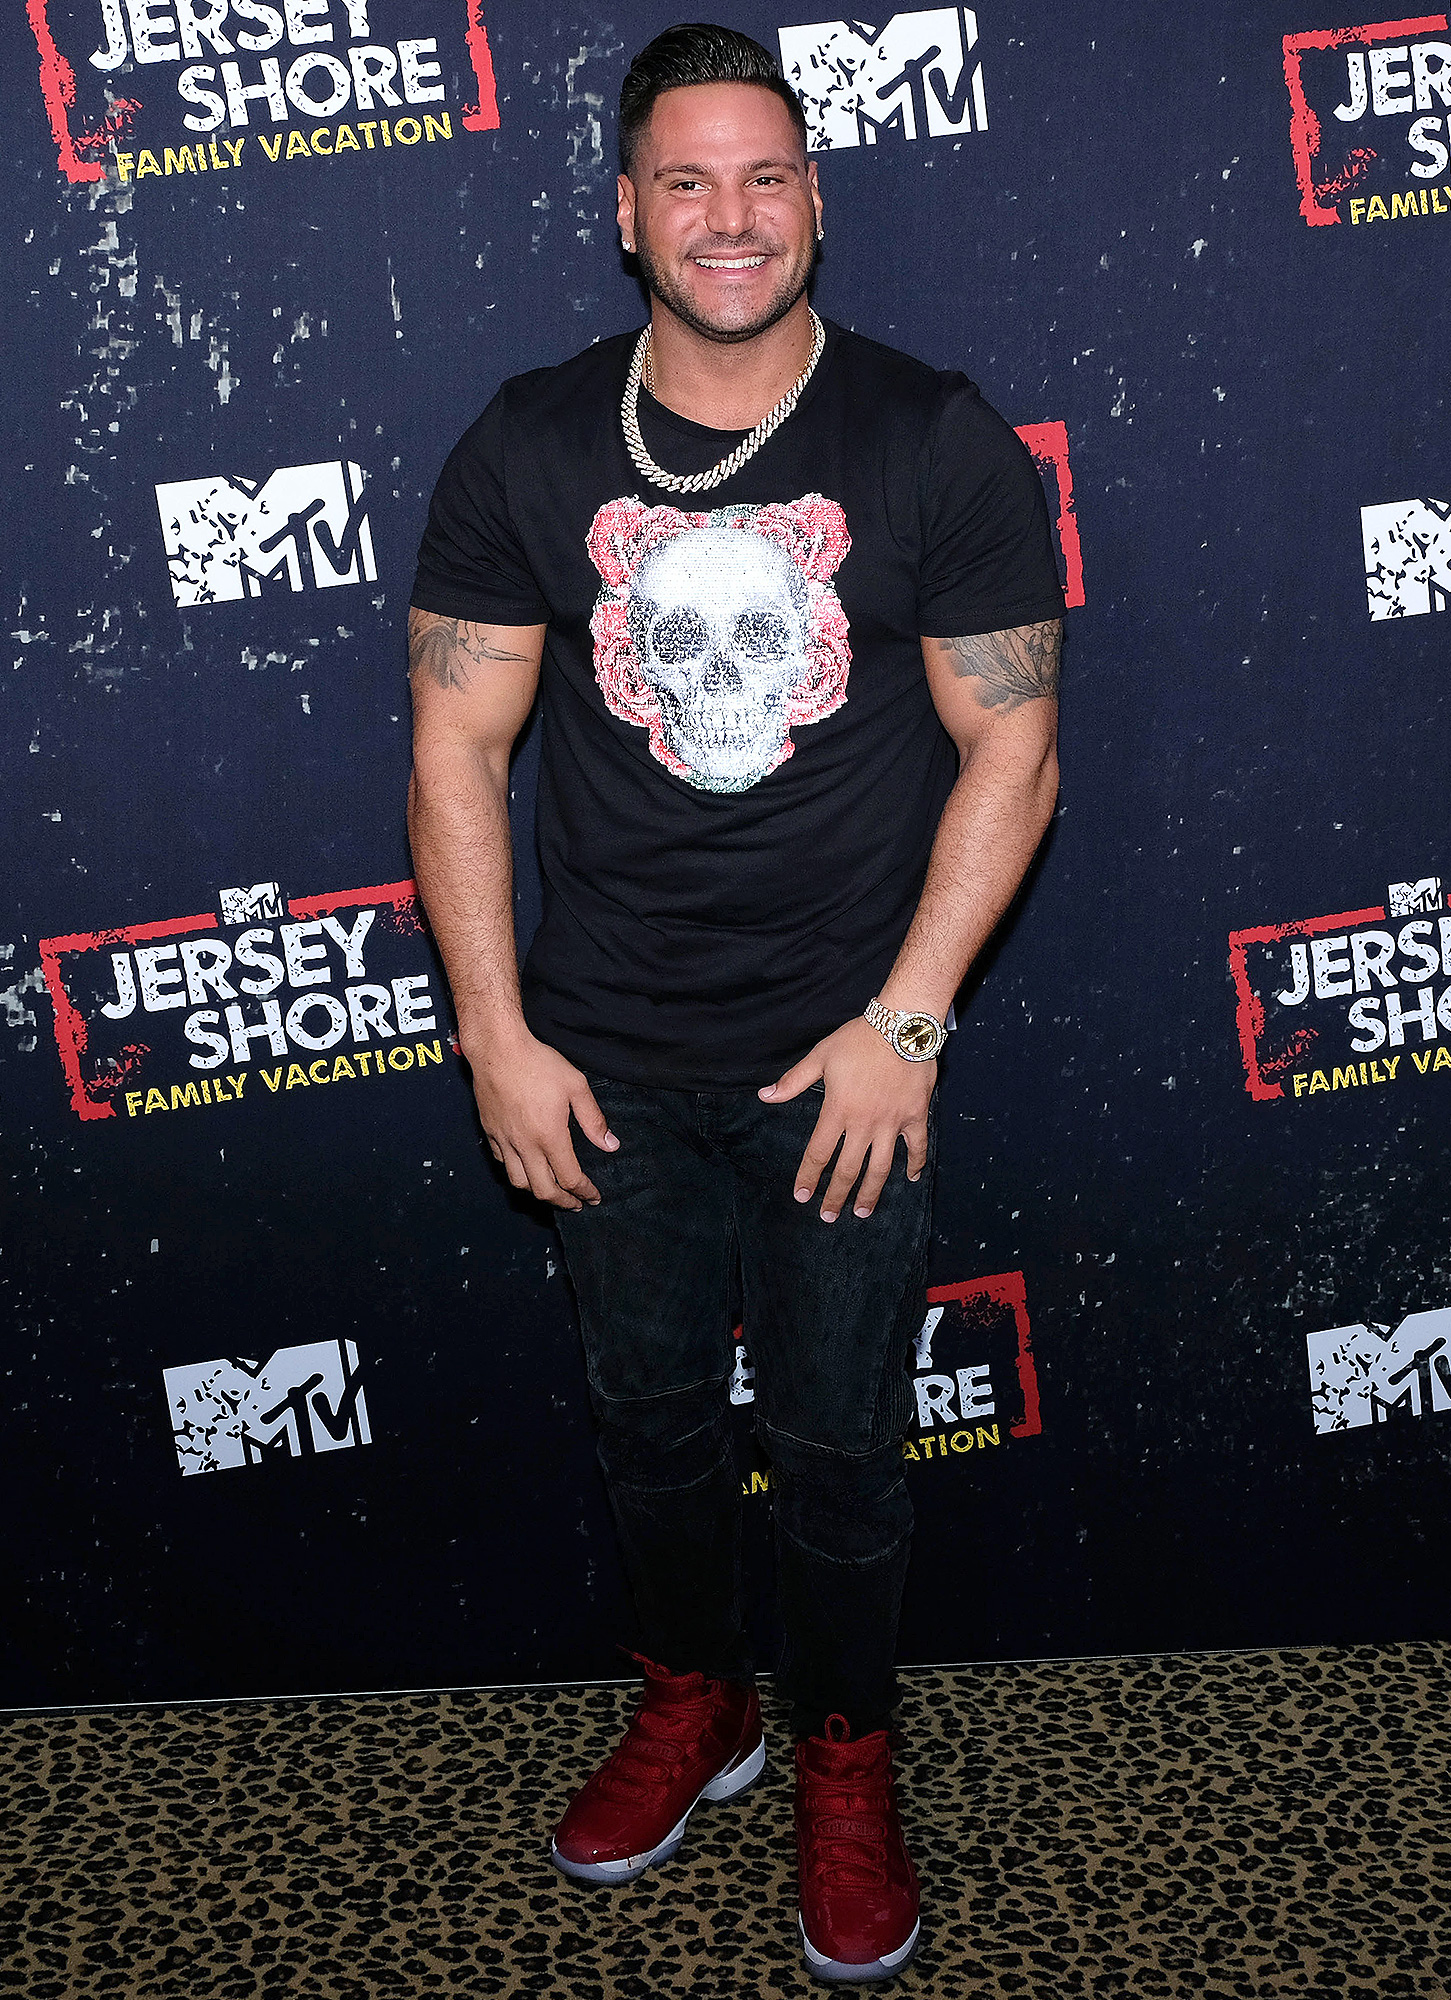 Ronnie Ortiz-Magro Shares Videos of Jen Harley After Instagram Fight